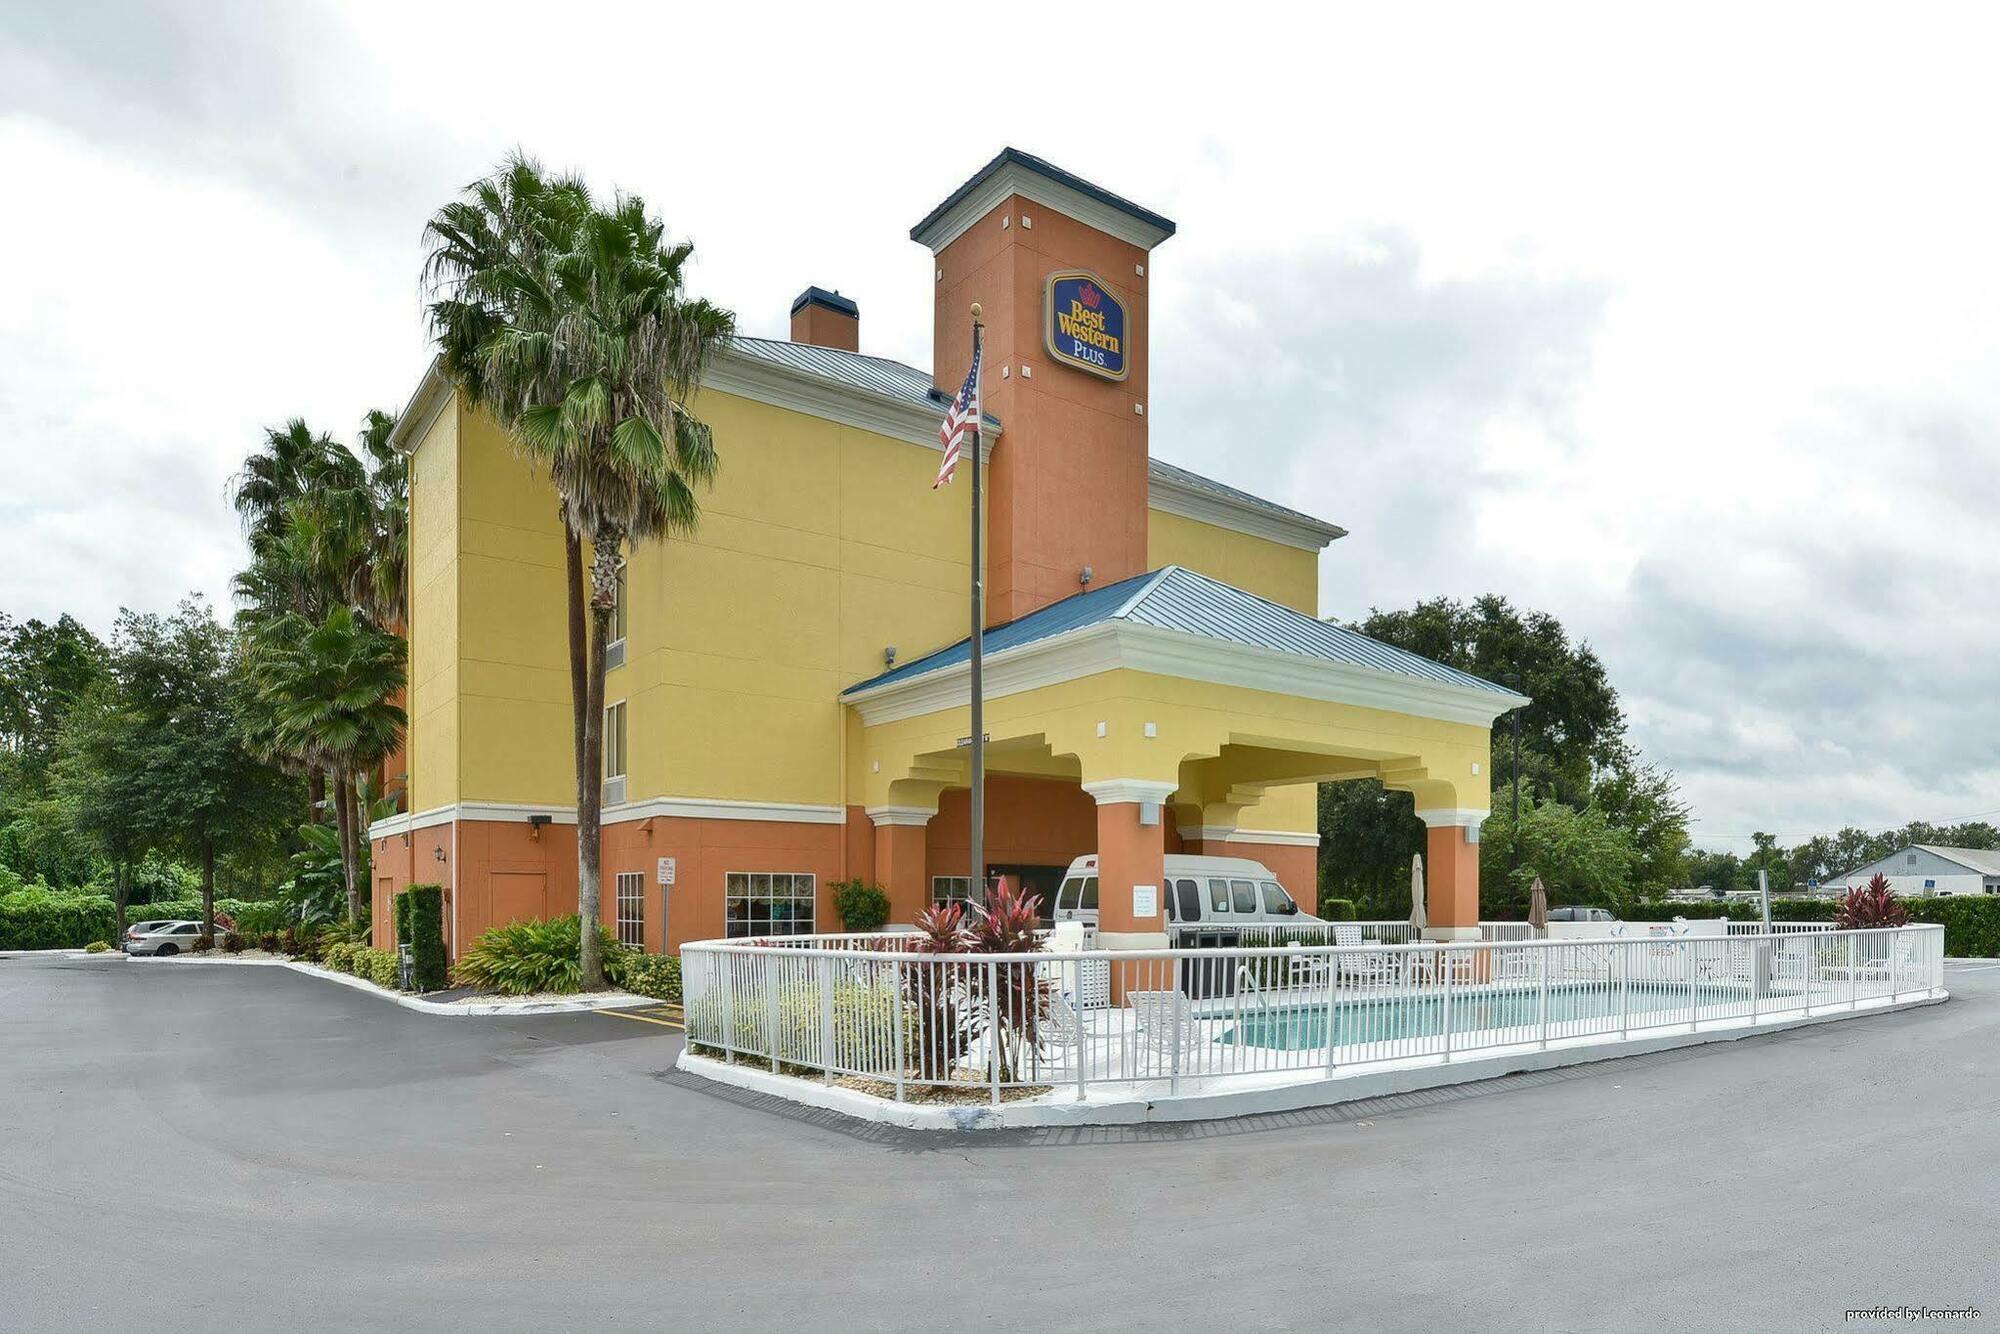 Best Western Plus Sanford Airport/Lake Mary Hotel Exterior photo